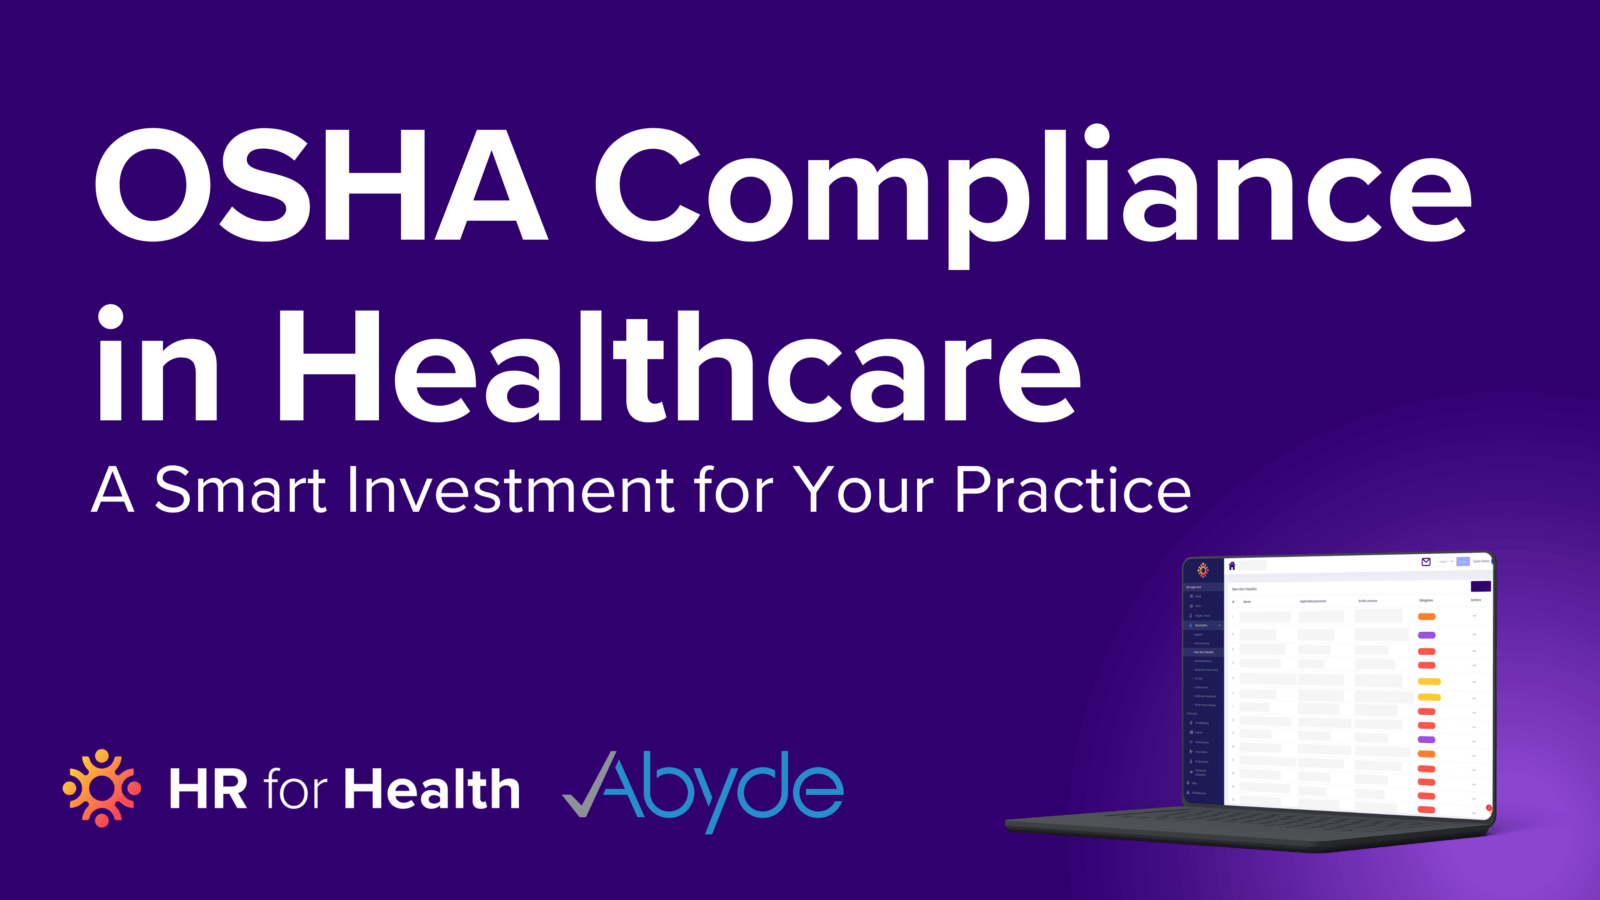 OSHA Compliance in Healthcare: A Smart Investment for Your Practice